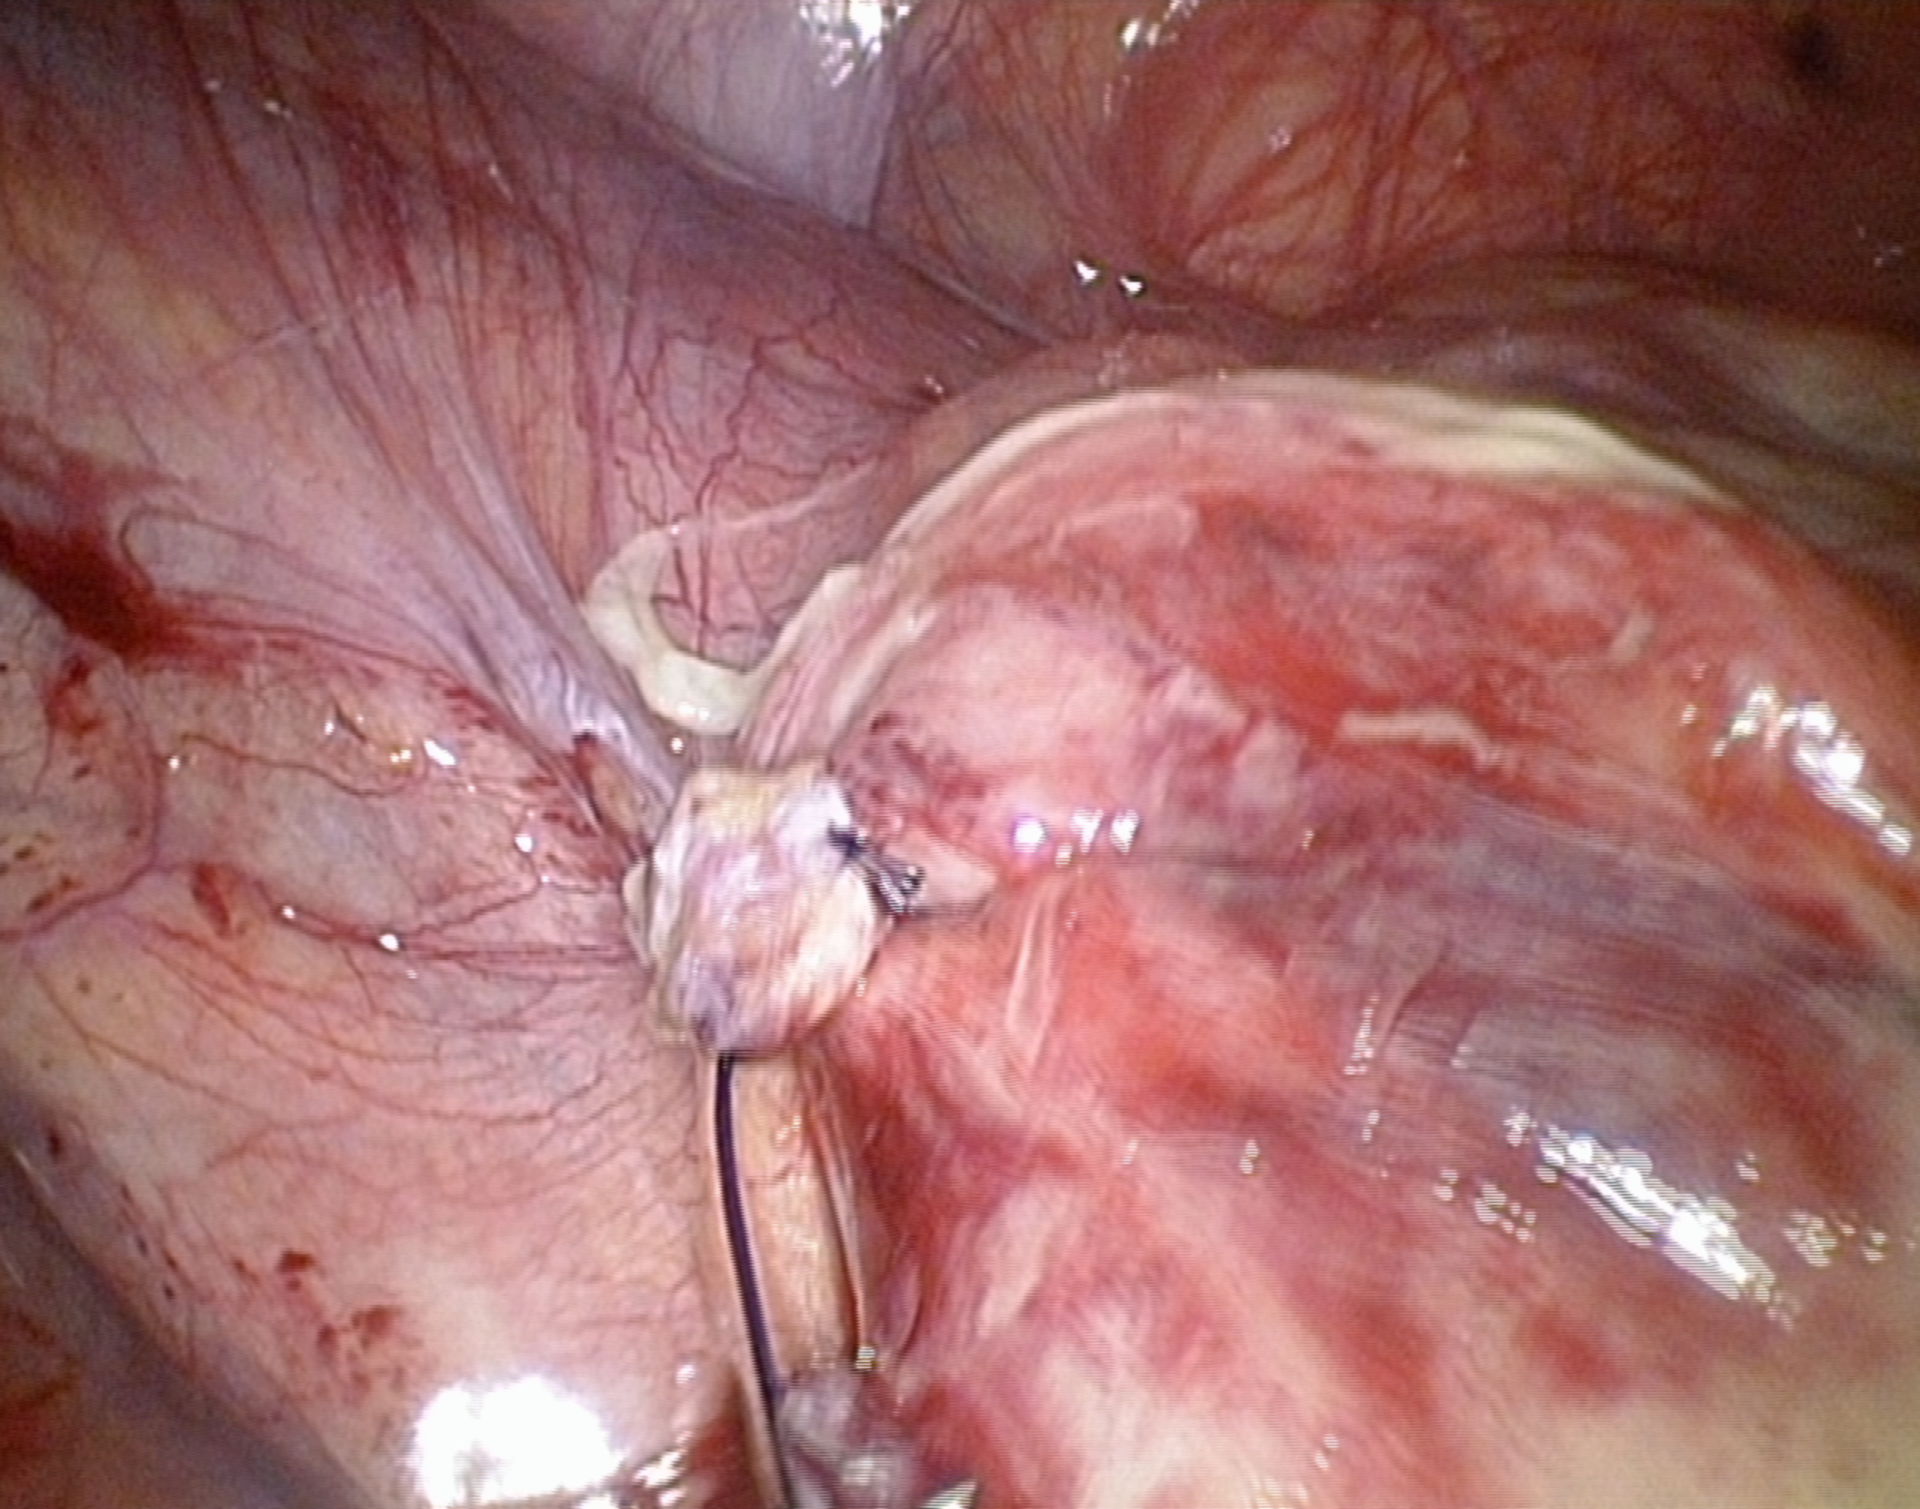 Perforated appendicitis - Area of ablation